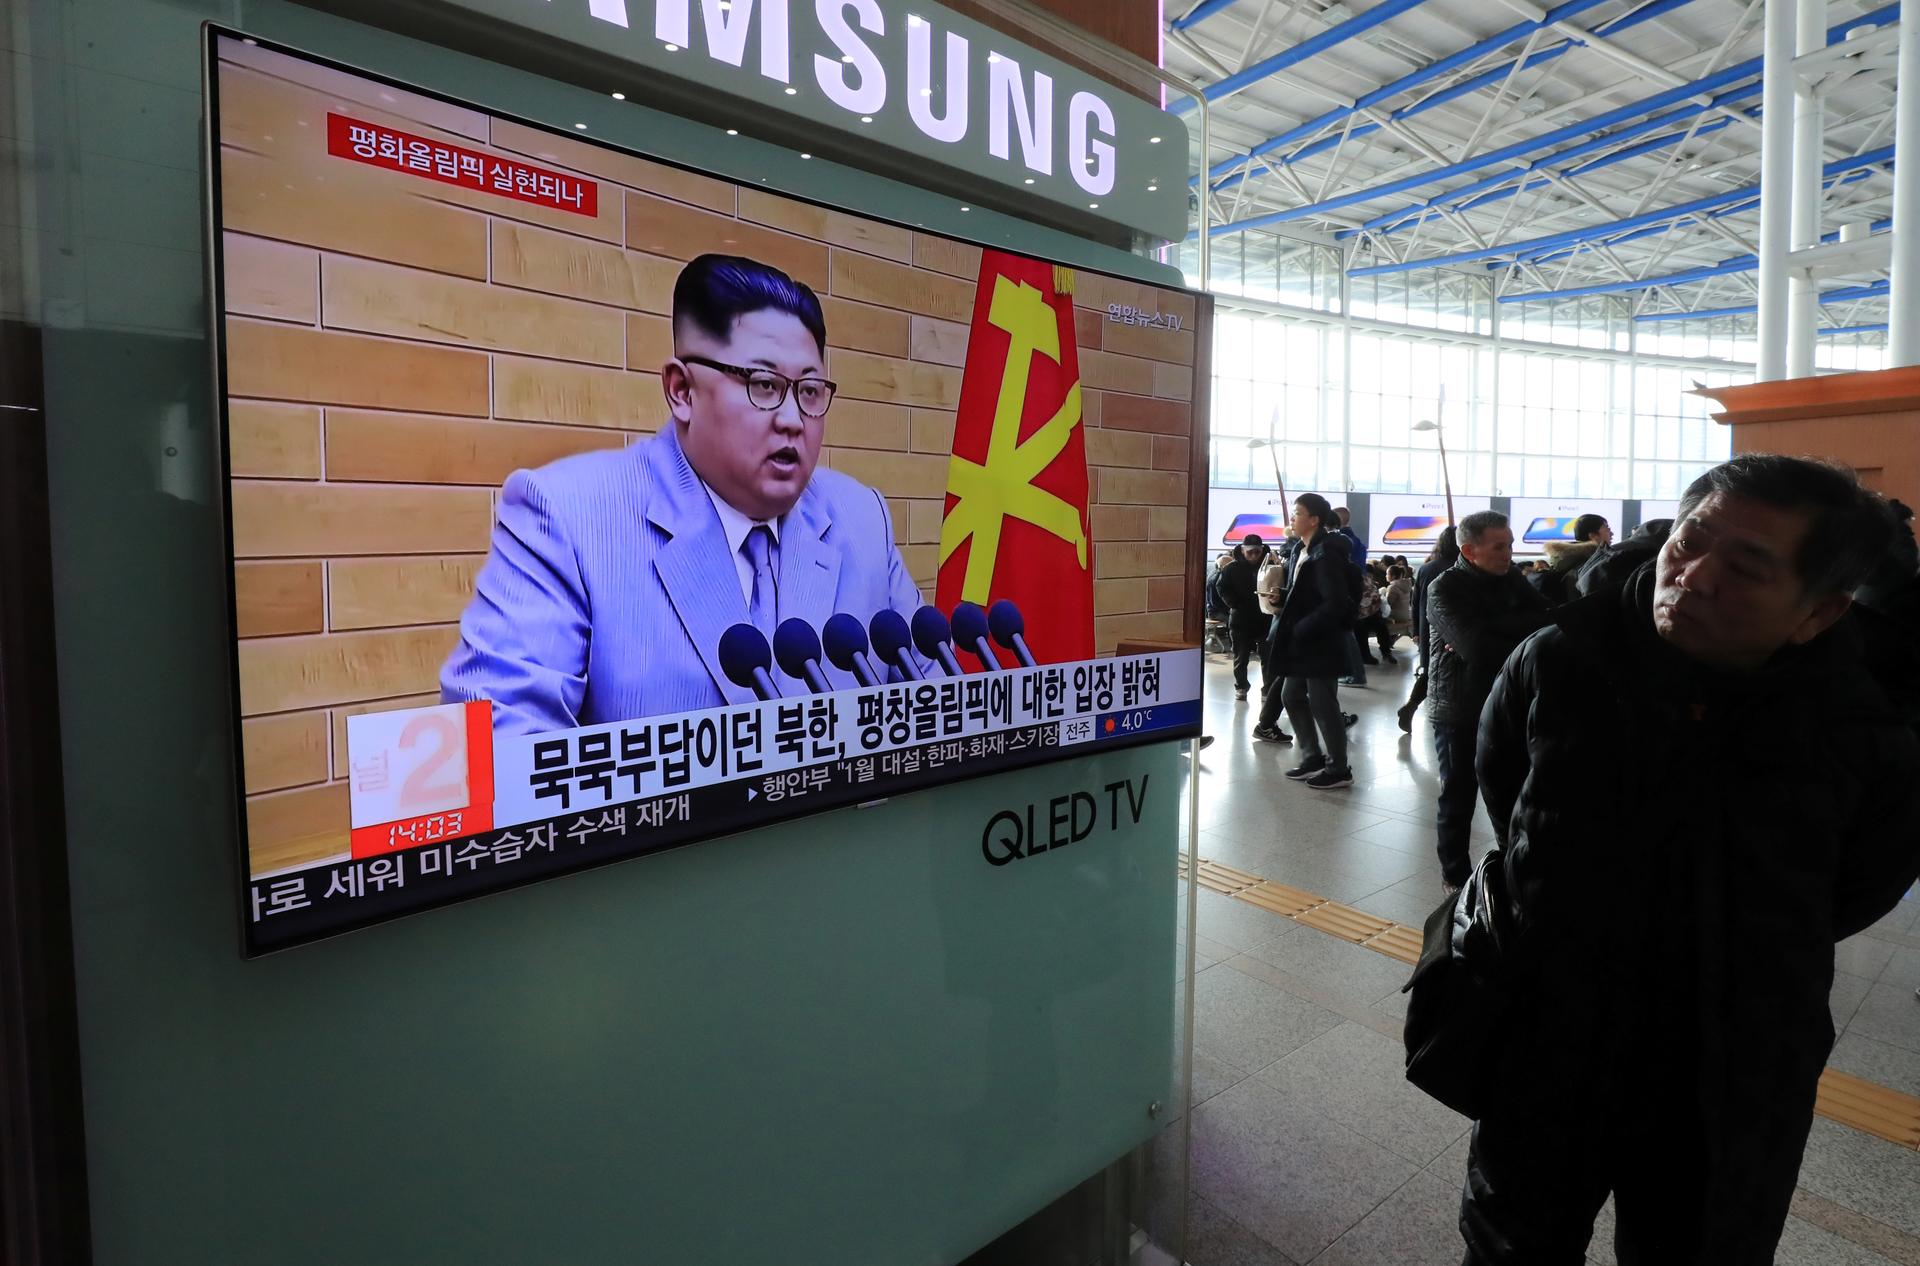 A man in Seoul, South Korea, watches a TV broadcasting a news report on North Korea's leader Kim Jong-un speaking during a New Year's Day speech.